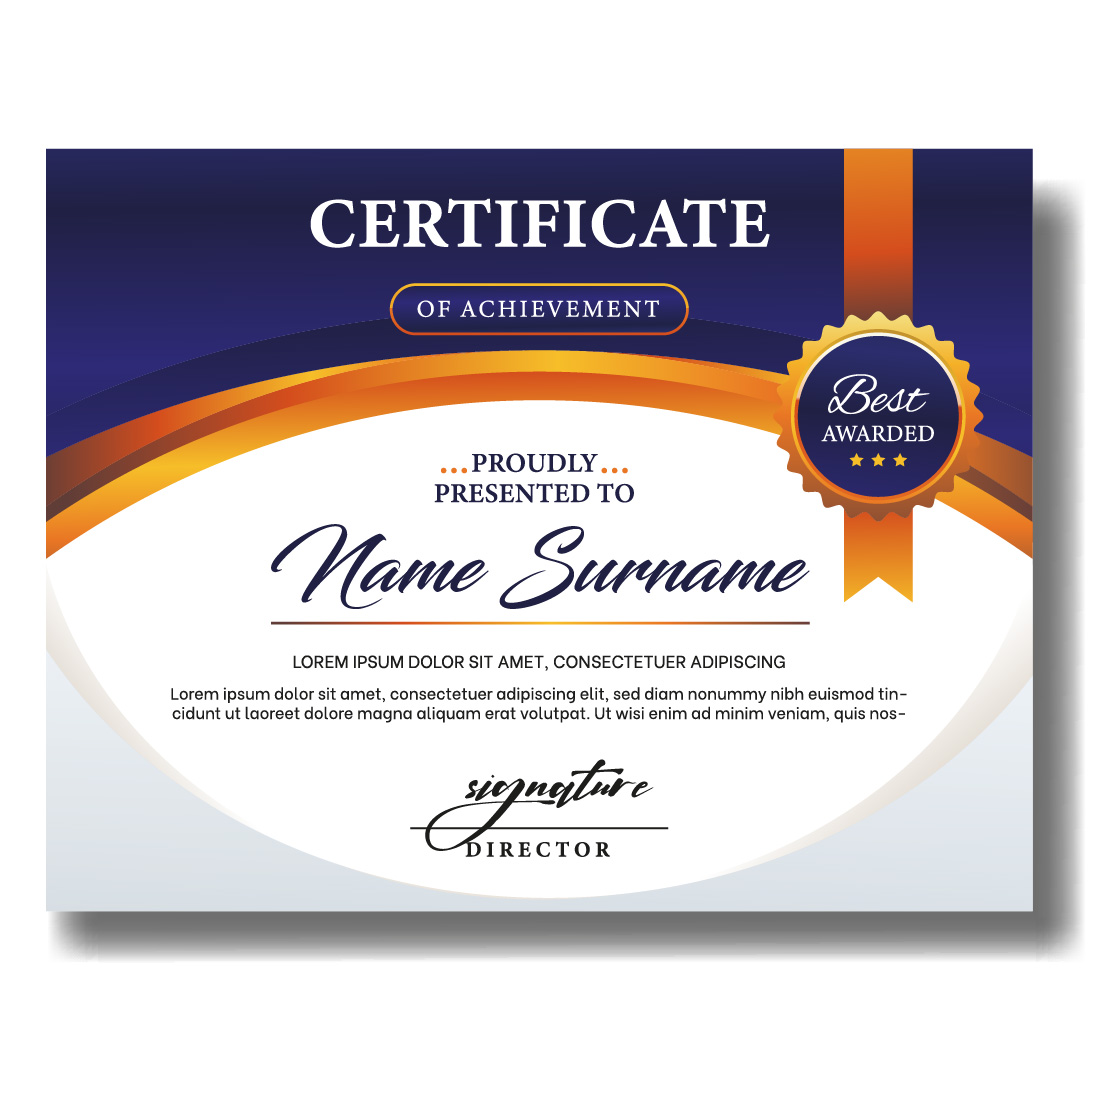 Modern and Luxurious Certificate Design